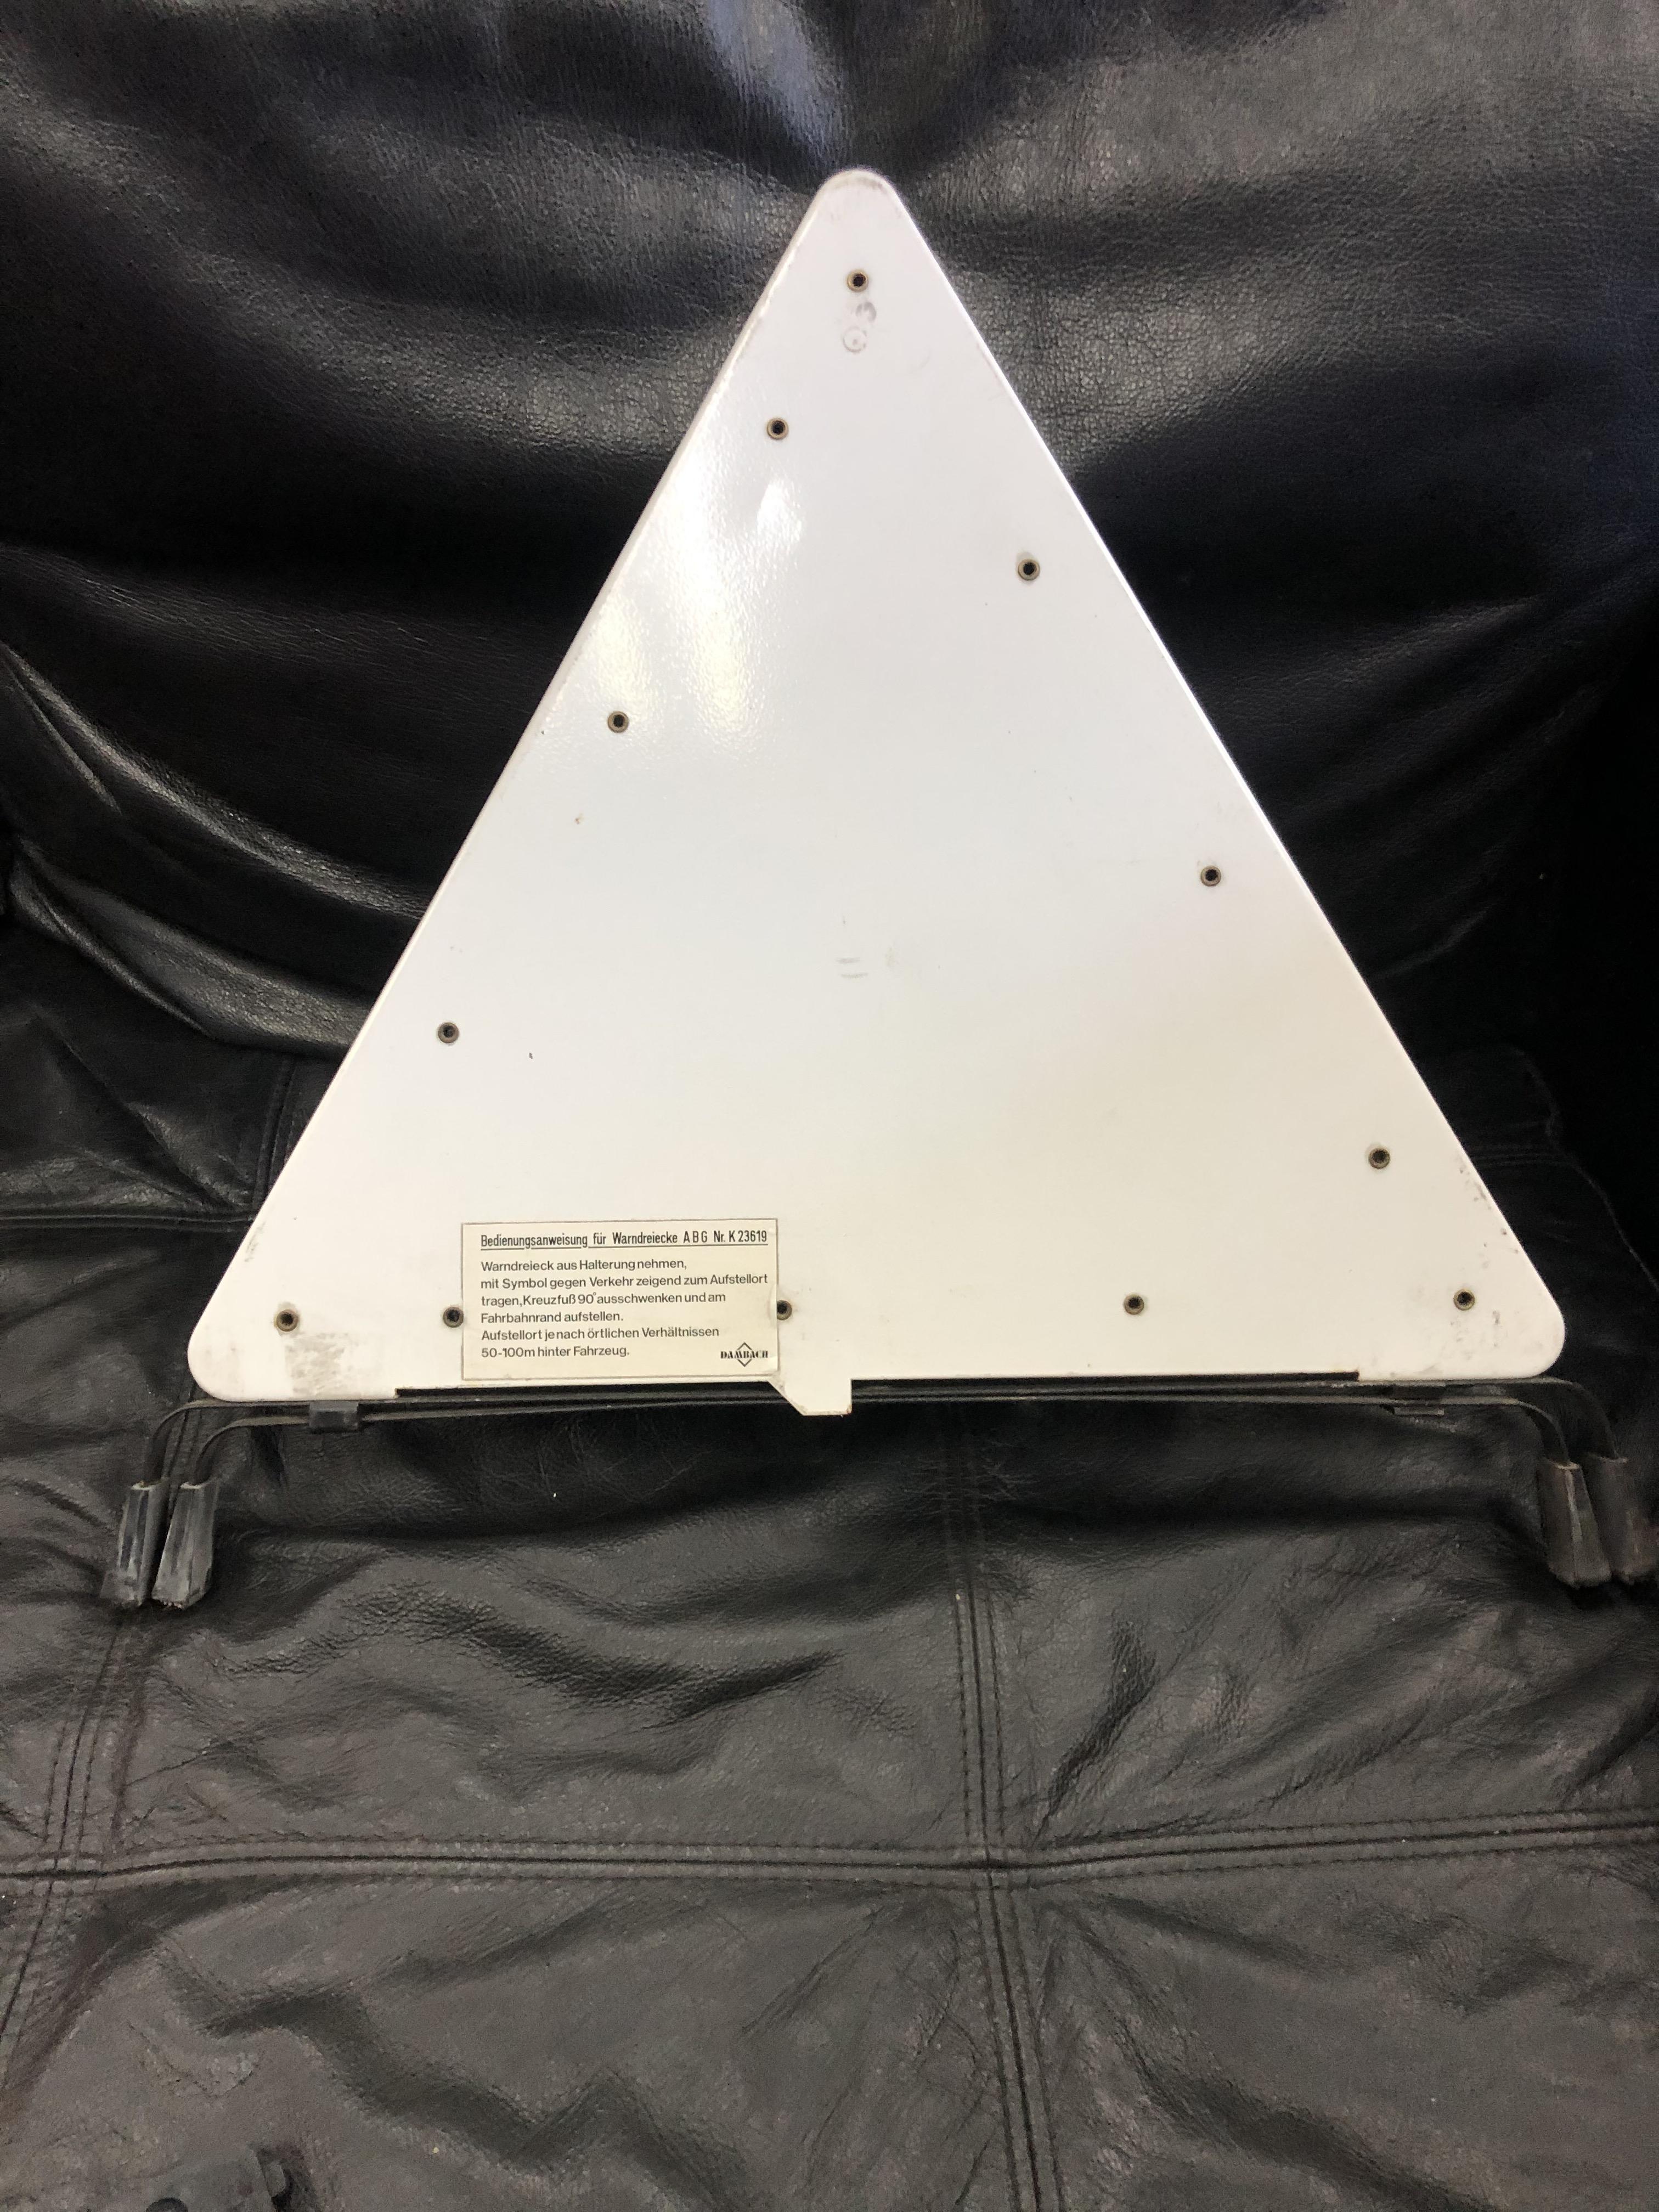 FOR SALE - Warning Triangle with Clip, used, Parts for Sale